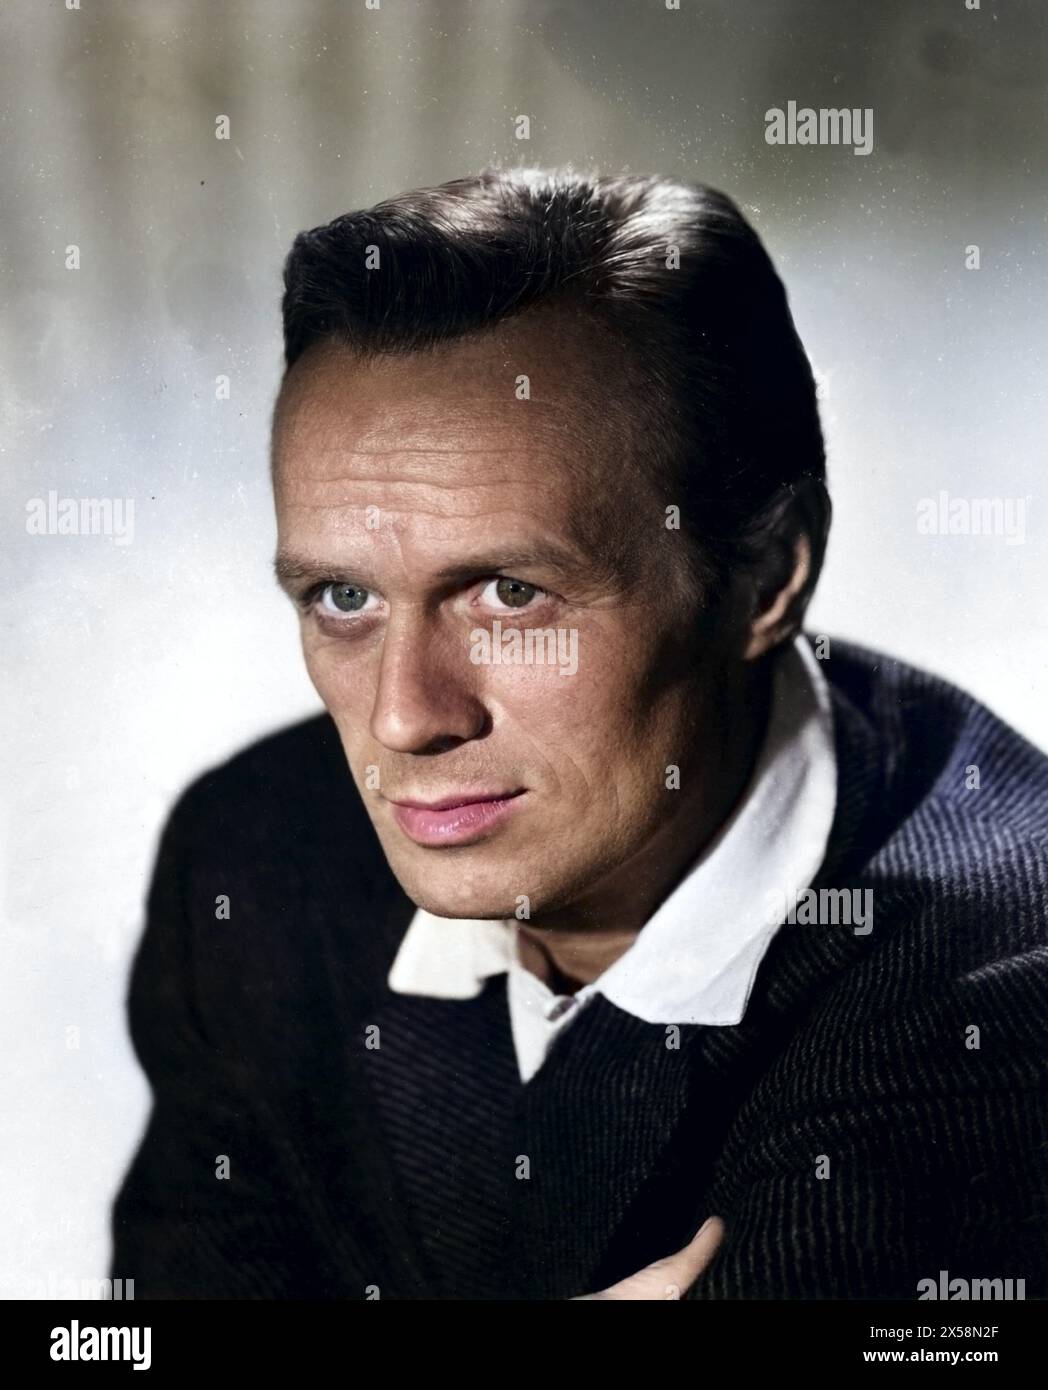 Widmark, Richard, 26.12.1926 - 24.3.2008, American actor, portrait, 1956, ADDITIONAL-RIGHTS-CLEARANCE-INFO-NOT-AVAILABLE Stock Photo